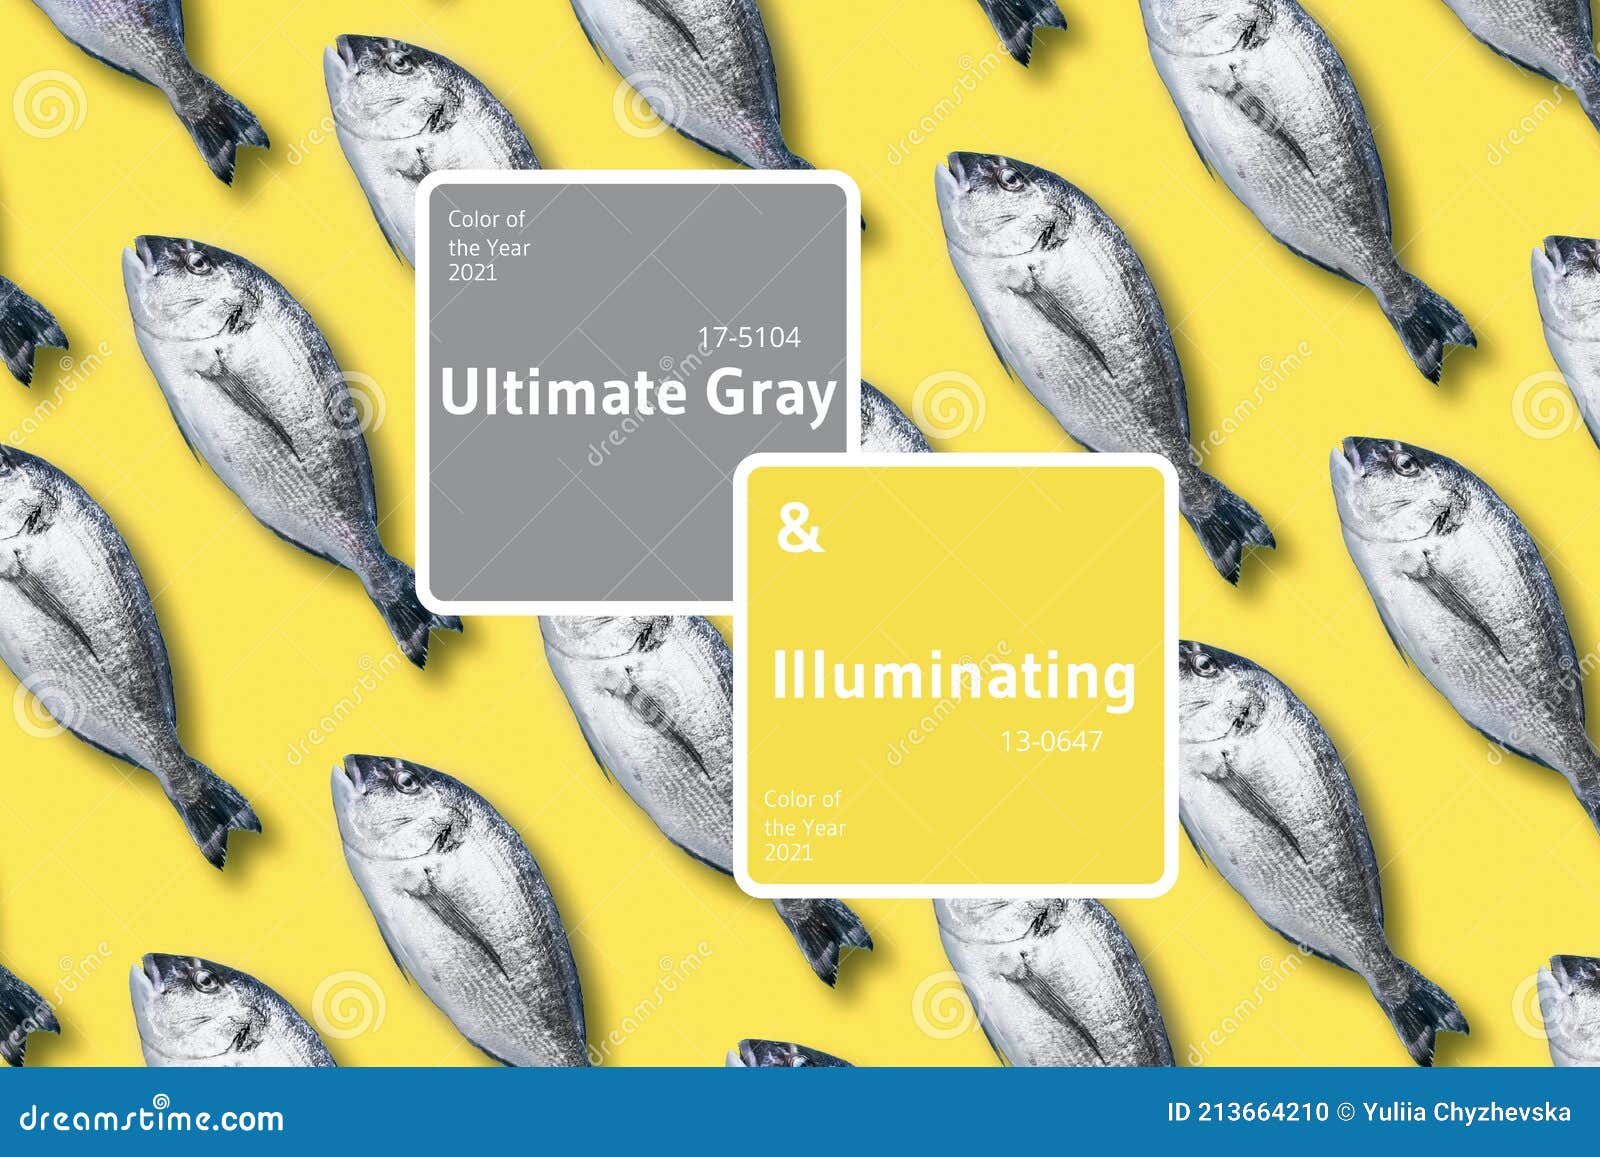 dorado fish pattern, food concept. demonstrating trendy color of the year 2021. illuminating yellow and ultimate gray